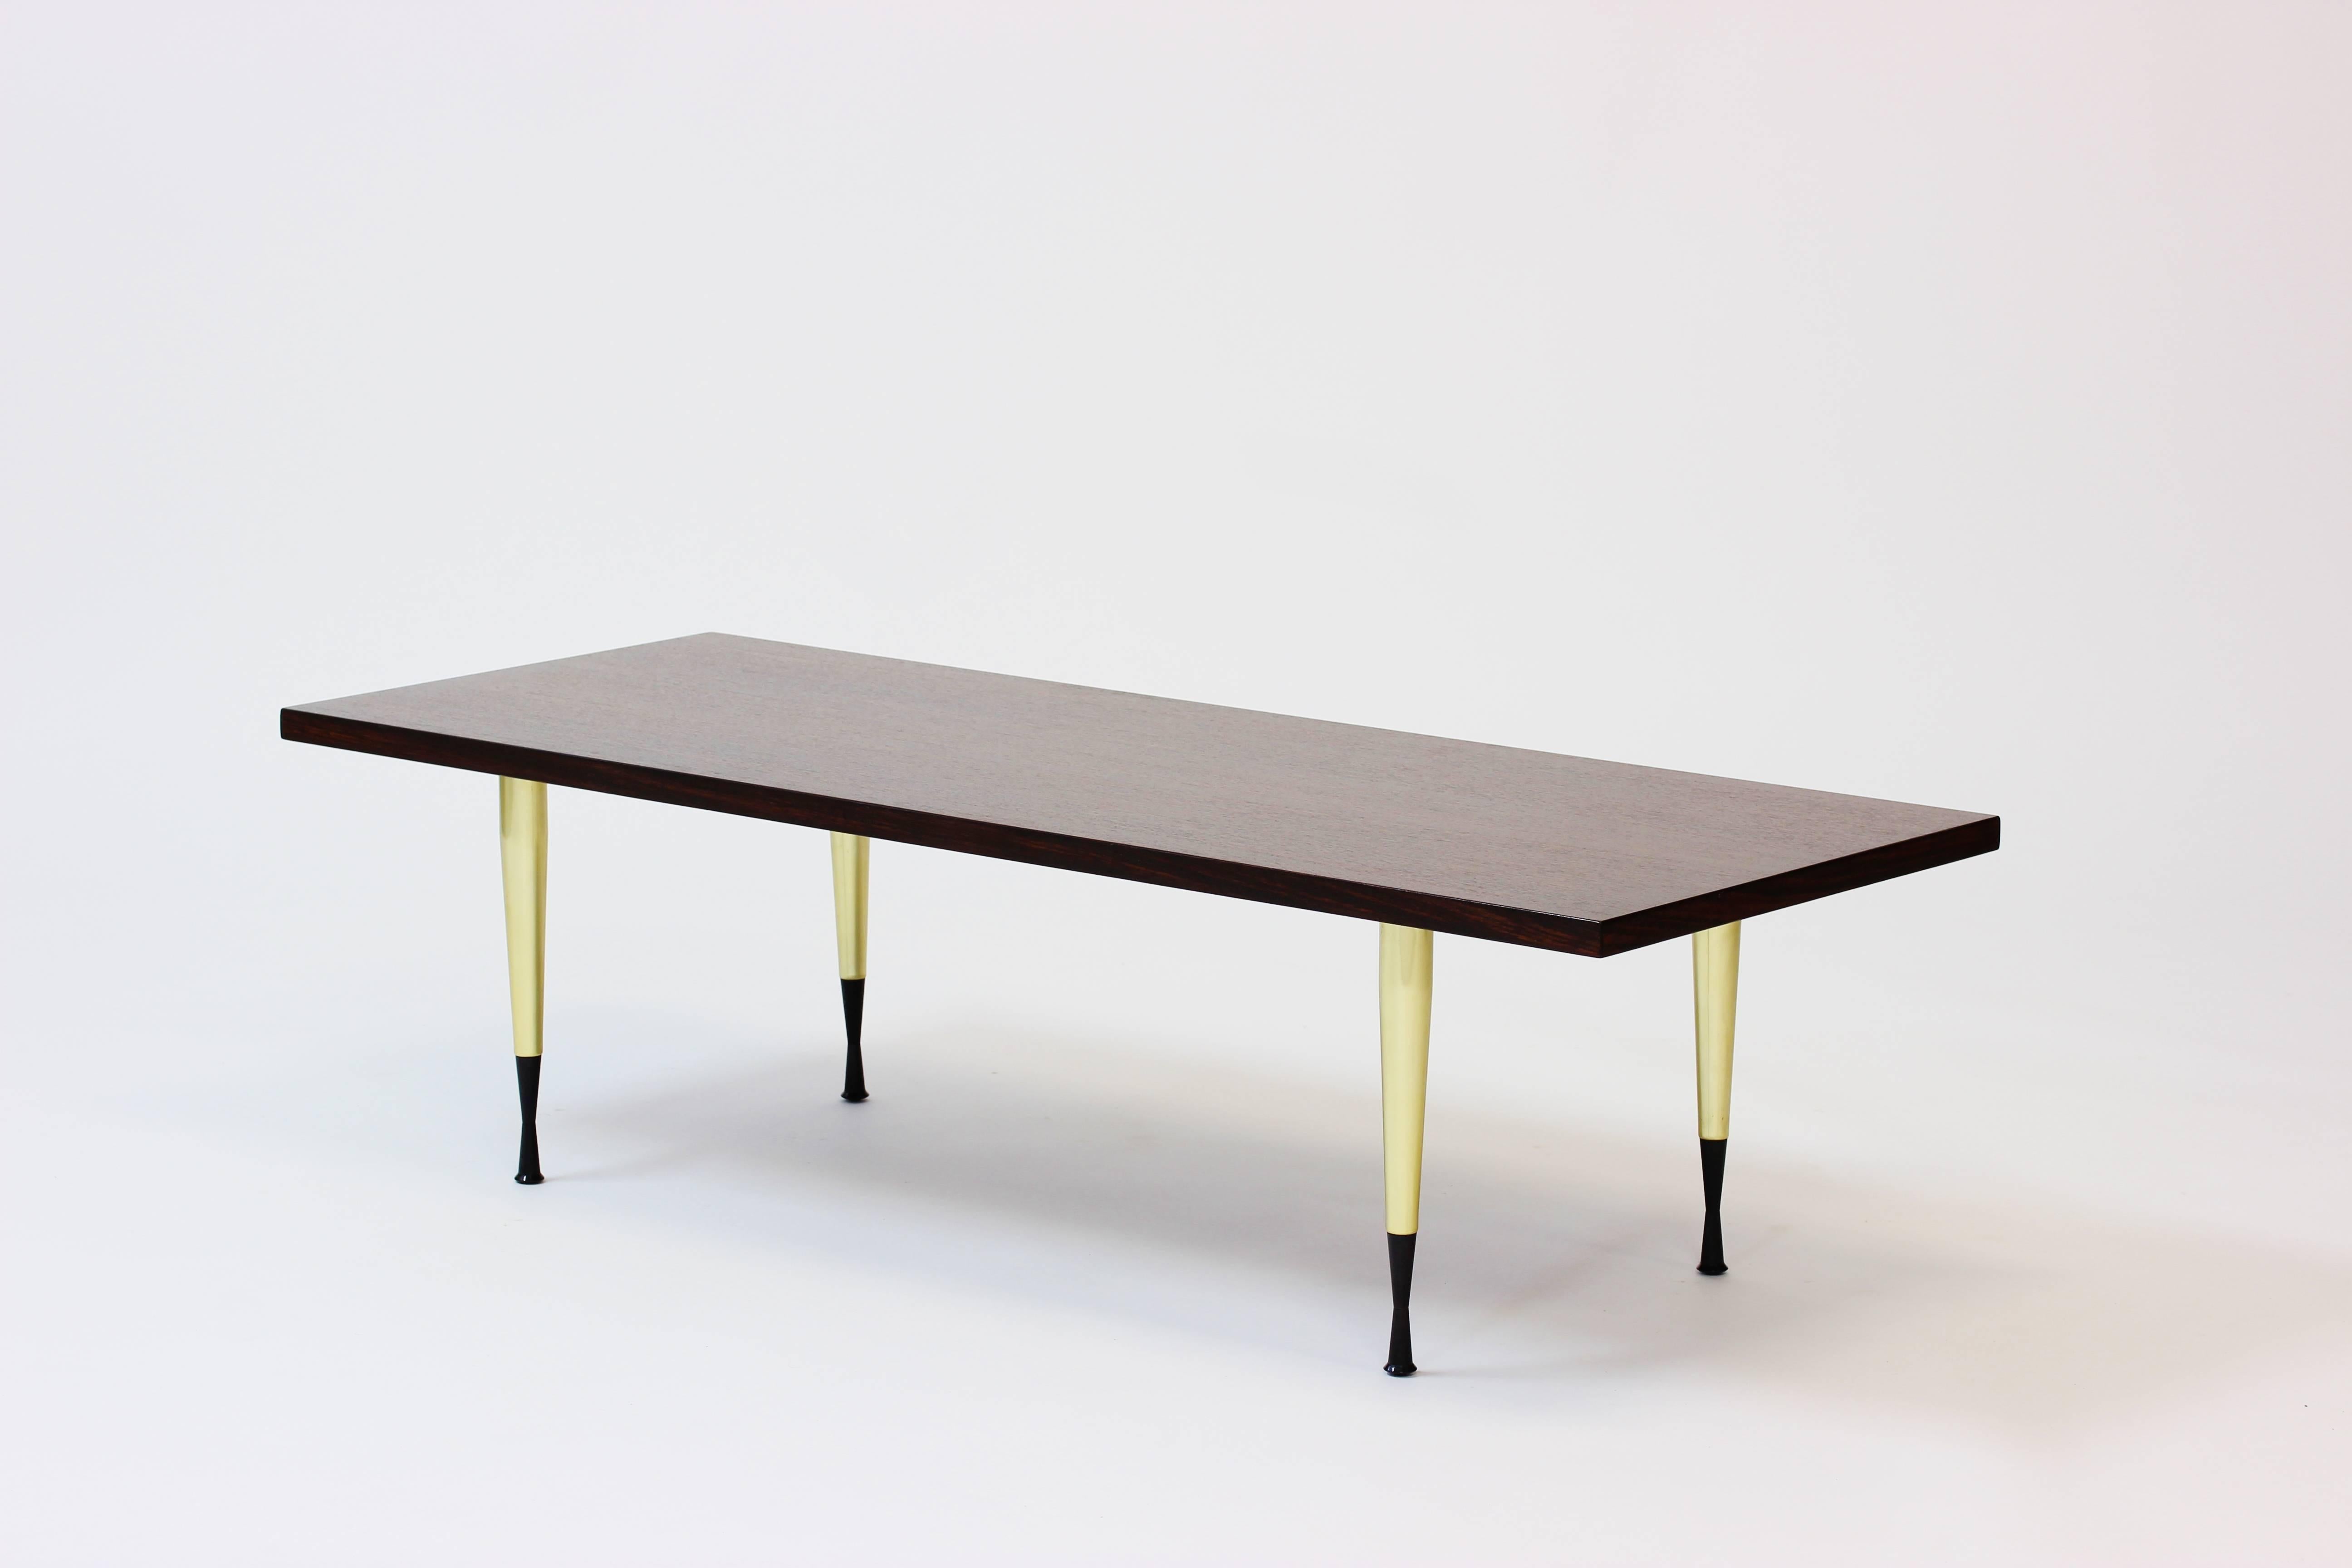 Cool coffee table made in from NK (Nordiska Kompaniet). The brass legs are Italian and imported by NK to give the walnut table top a stylish Italian accent. Marked “NK Furniture” underneath.